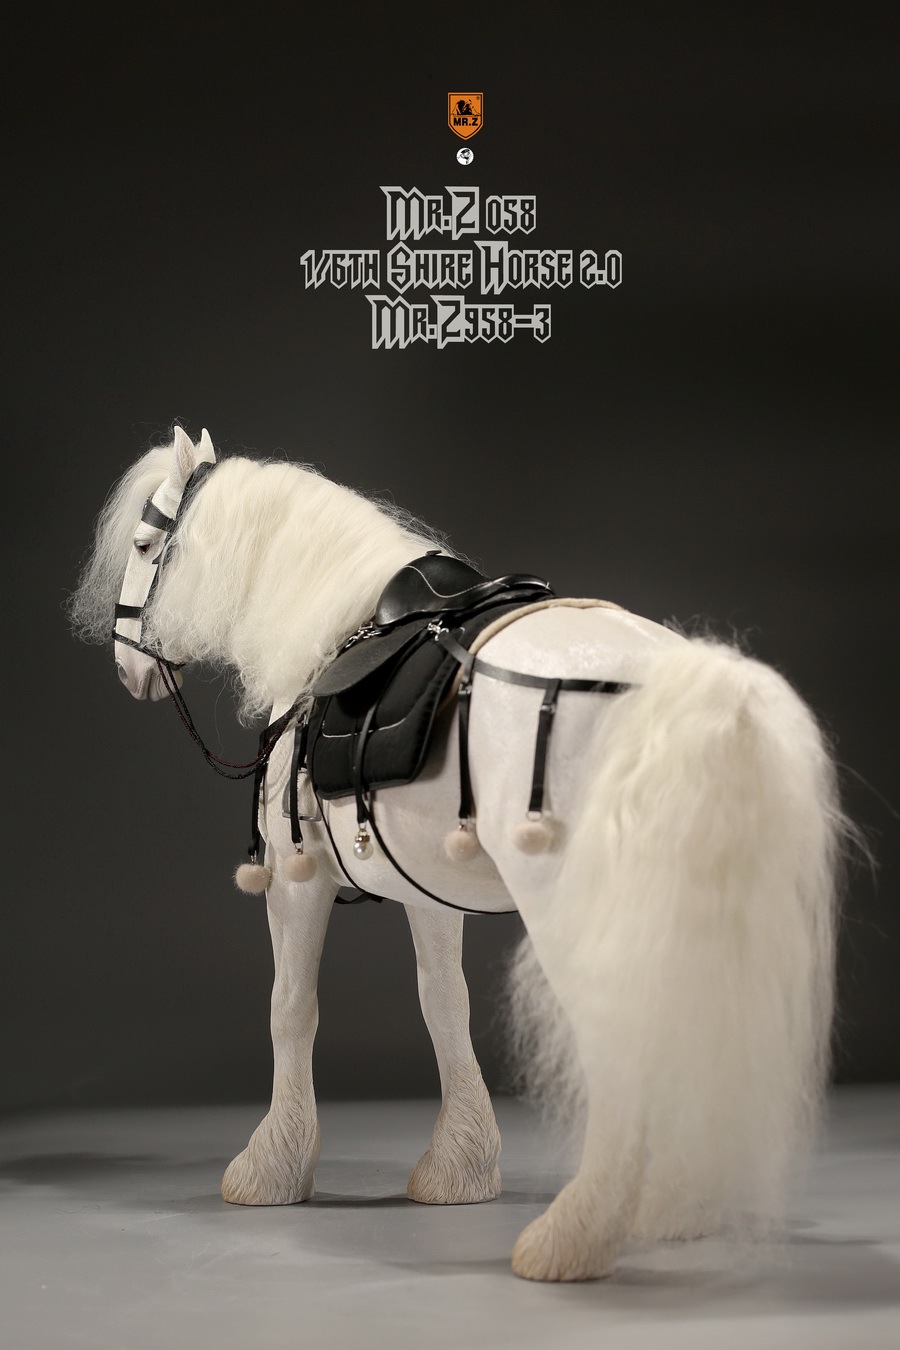 NEW PRODUCT: MR. Z: 58th round-Shire Horse 2.0 version full set of 5 colors  08575312